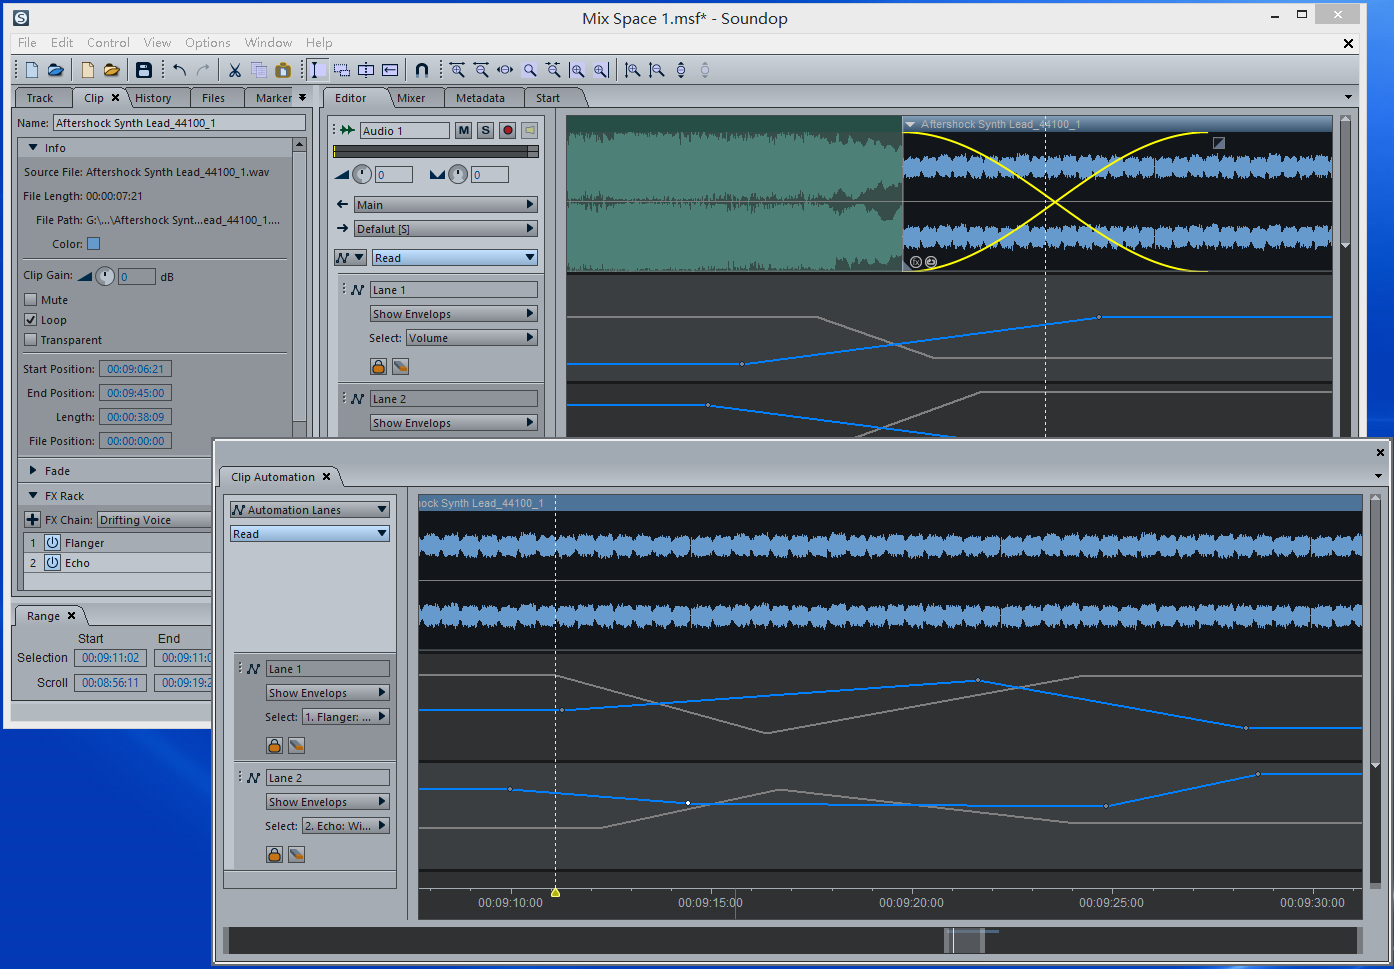 Soundop Audio Editor 1.8.26.1 download the last version for android